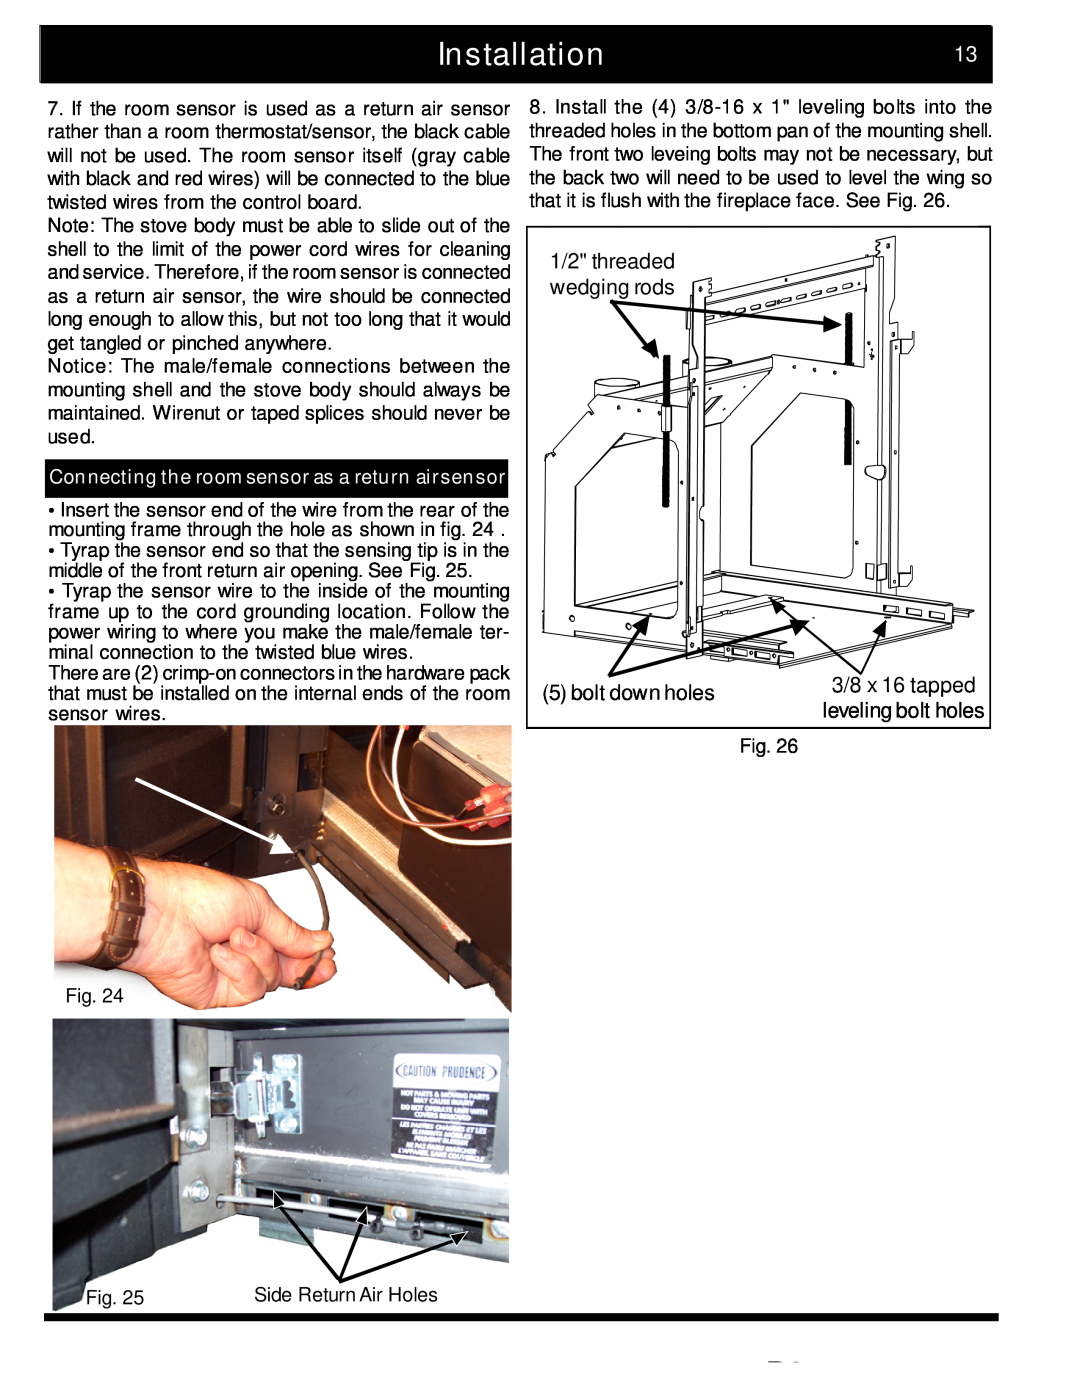 Harman Stove Company The Harman Accentra Pellet Insert manual Installation13, 1/2 threaded wedging rods, bolt down holes 